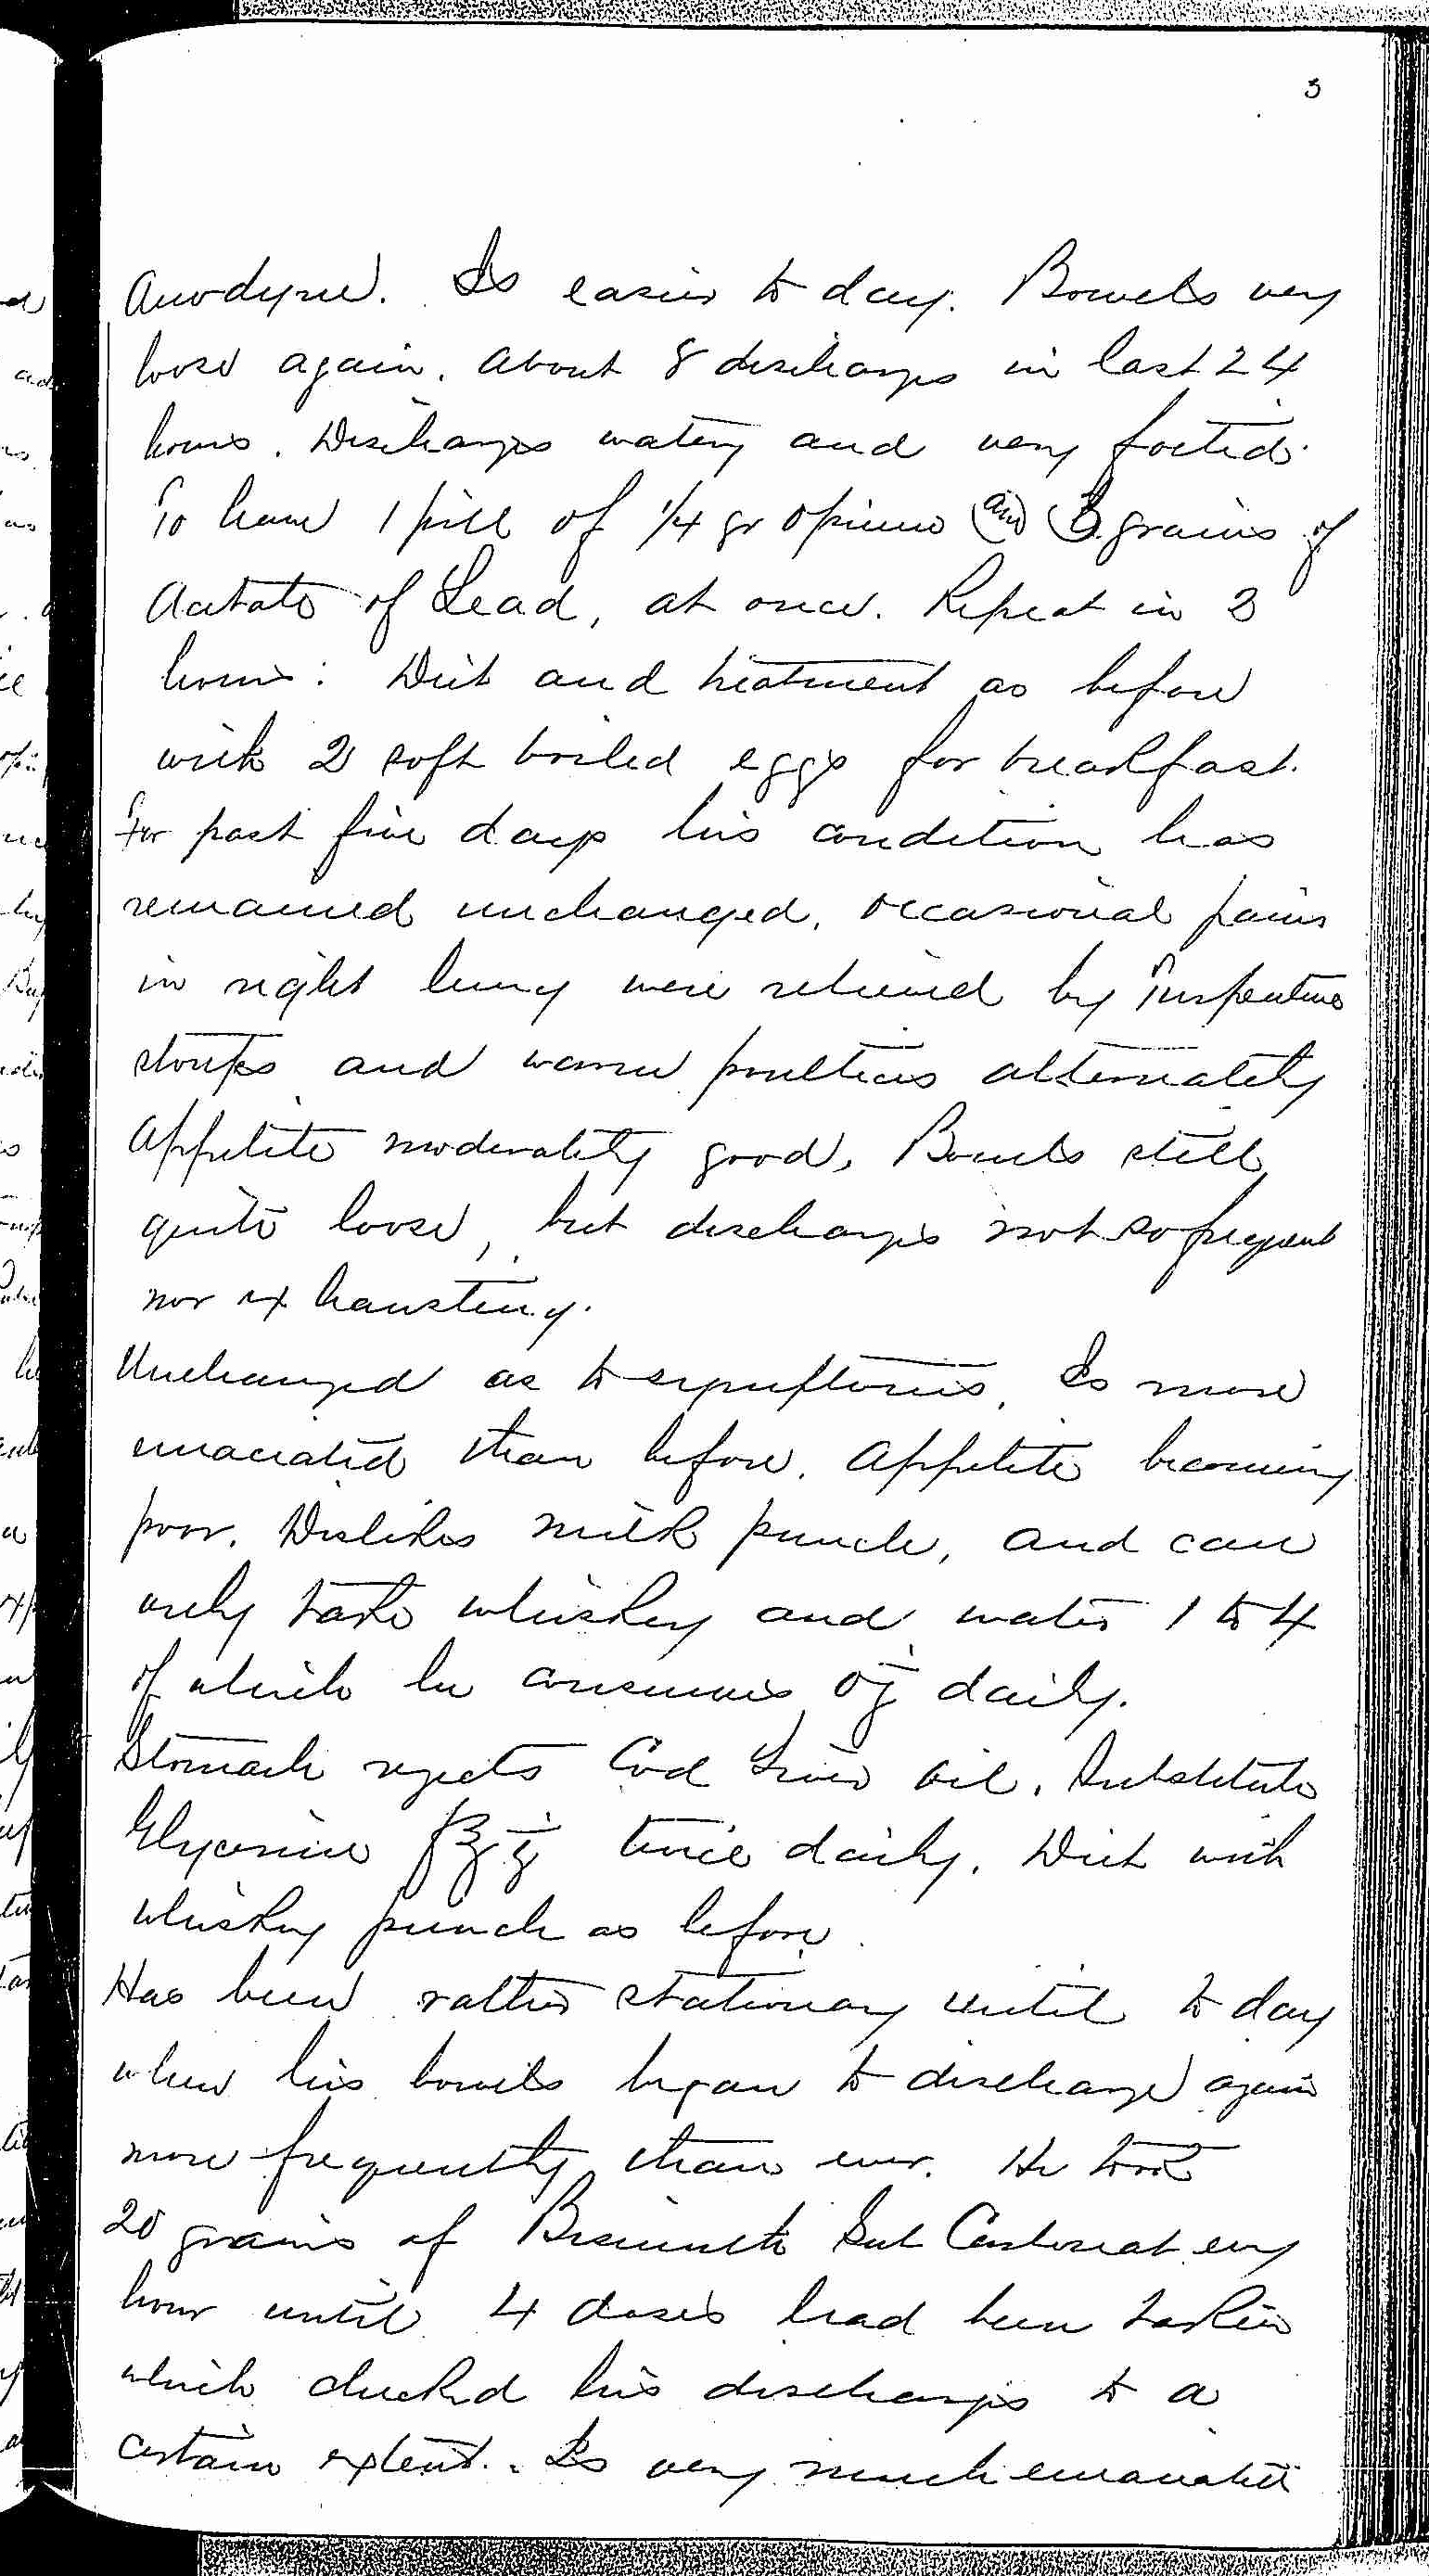 Entry for William Robertson (page 3 of 5) in the log Hospital Tickets and Case Papers - Naval Hospital - Washington, D.C. - 1868-69